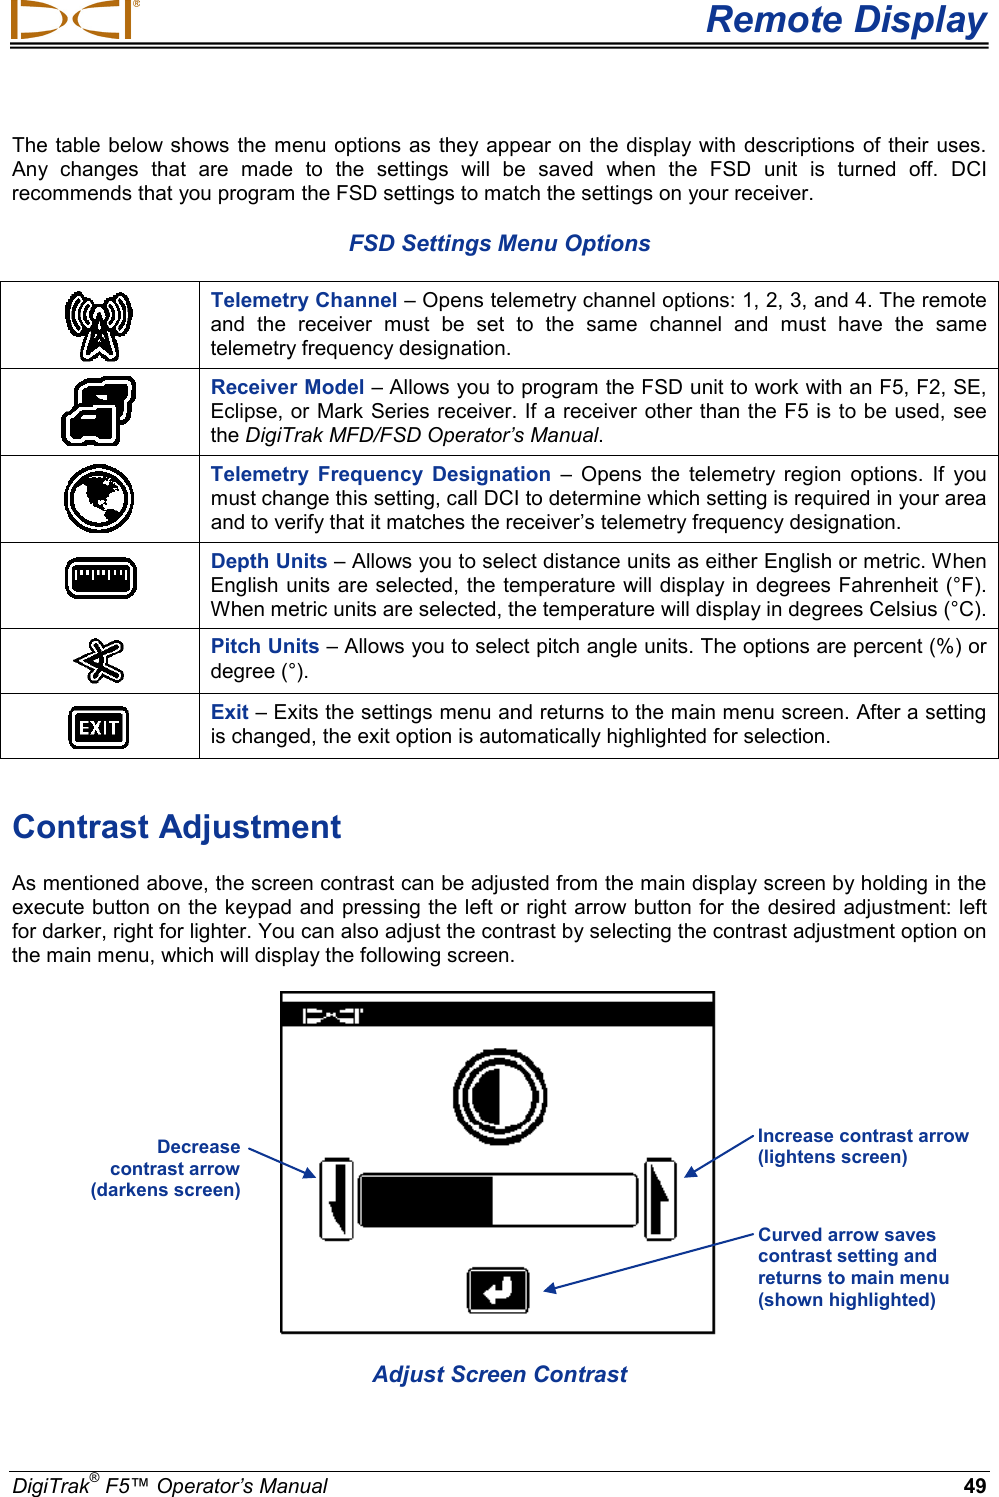  Remote Display DigiTrak® F5™ Operator’s Manual 49 The table below shows the menu options as they appear on the display with descriptions of their uses. Any changes that are made to the settings will be saved when the FSD unit is turned off. DCI recommends that you program the FSD settings to match the settings on your receiver. FSD Settings Menu Options  Telemetry Channel – Opens telemetry channel options: 1, 2, 3, and 4. The remote and the receiver must be set to the same channel and must have the same telemetry frequency designation.  Receiver Model – Allows you to program the FSD unit to work with an F5, F2, SE, Eclipse, or Mark Series receiver. If a receiver other than the F5 is to be used, see the DigiTrak MFD/FSD Operator’s Manual.   Telemetry Frequency Designation – Opens the telemetry region options. If you must change this setting, call DCI to determine which setting is required in your area and to verify that it matches the receiver’s telemetry frequency designation.  Depth Units – Allows you to select distance units as either English or metric. When English units are selected, the temperature will display in degrees Fahrenheit (°F). When metric units are selected, the temperature will display in degrees Celsius (°C).   Pitch Units – Allows you to select pitch angle units. The options are percent (%) or degree (°).  Exit – Exits the settings menu and returns to the main menu screen. After a setting is changed, the exit option is automatically highlighted for selection.  Contrast Adjustment As mentioned above, the screen contrast can be adjusted from the main display screen by holding in the execute button on the keypad and pressing the left or right arrow button for the desired adjustment: left for darker, right for lighter. You can also adjust the contrast by selecting the contrast adjustment option on the main menu, which will display the following screen.  Adjust Screen Contrast Decrease  contrast arrow  (darkens screen) Increase contrast arrow (lightens screen) Curved arrow saves contrast setting and returns to main menu (shown highlighted) 